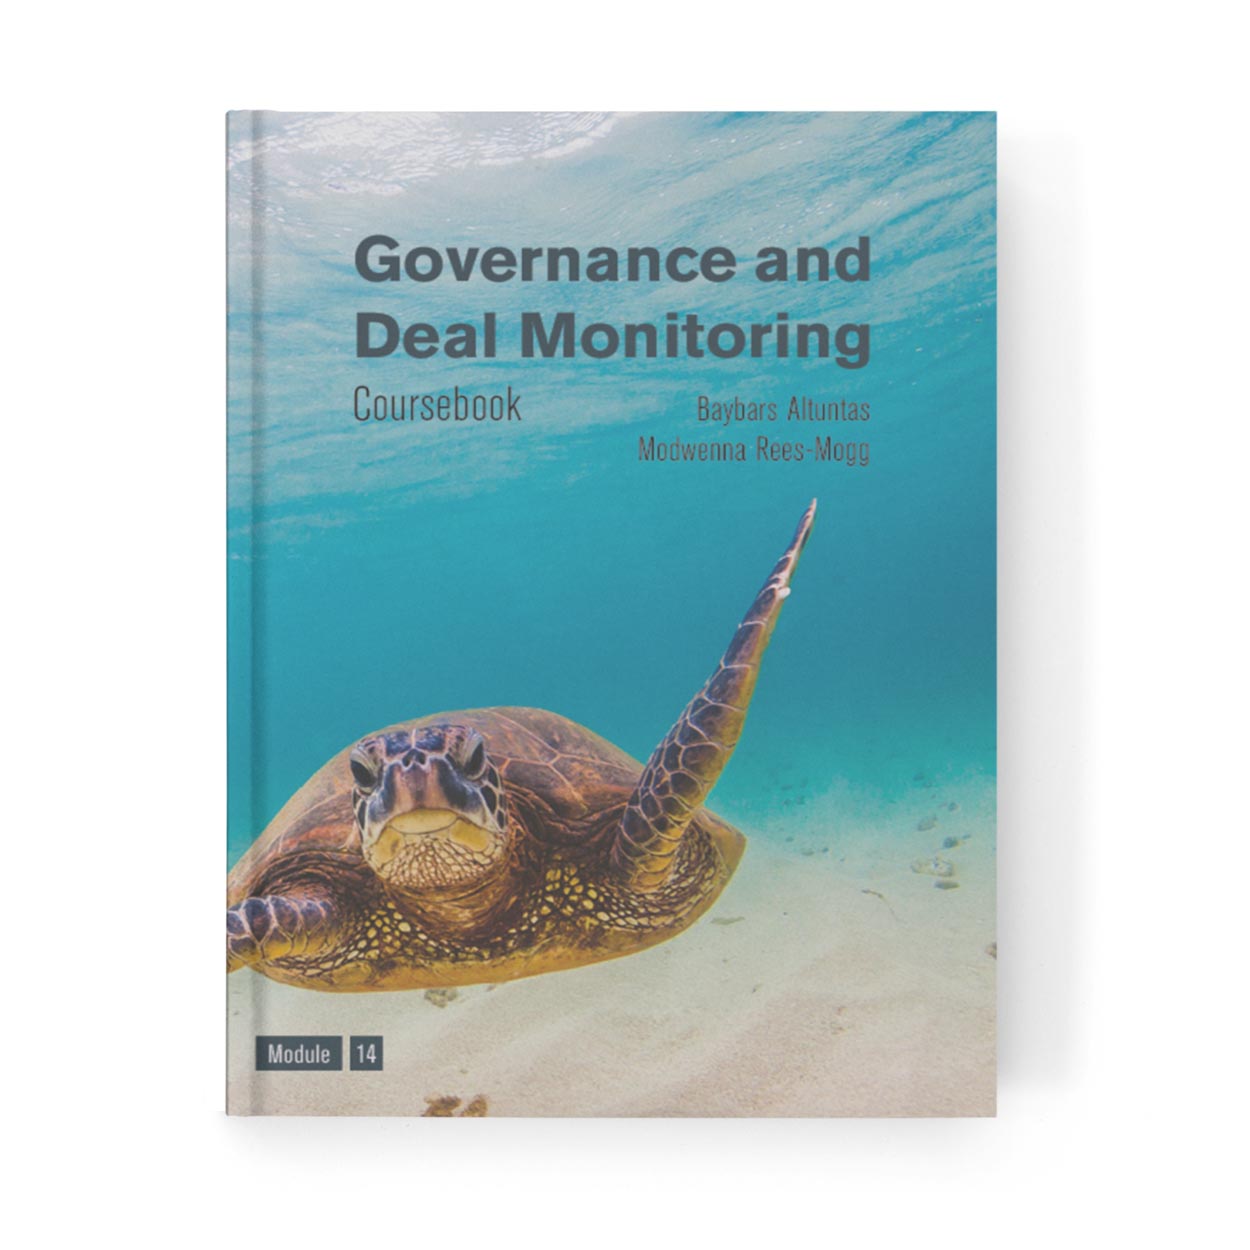 Governance and Deal Monitoring Coursebook